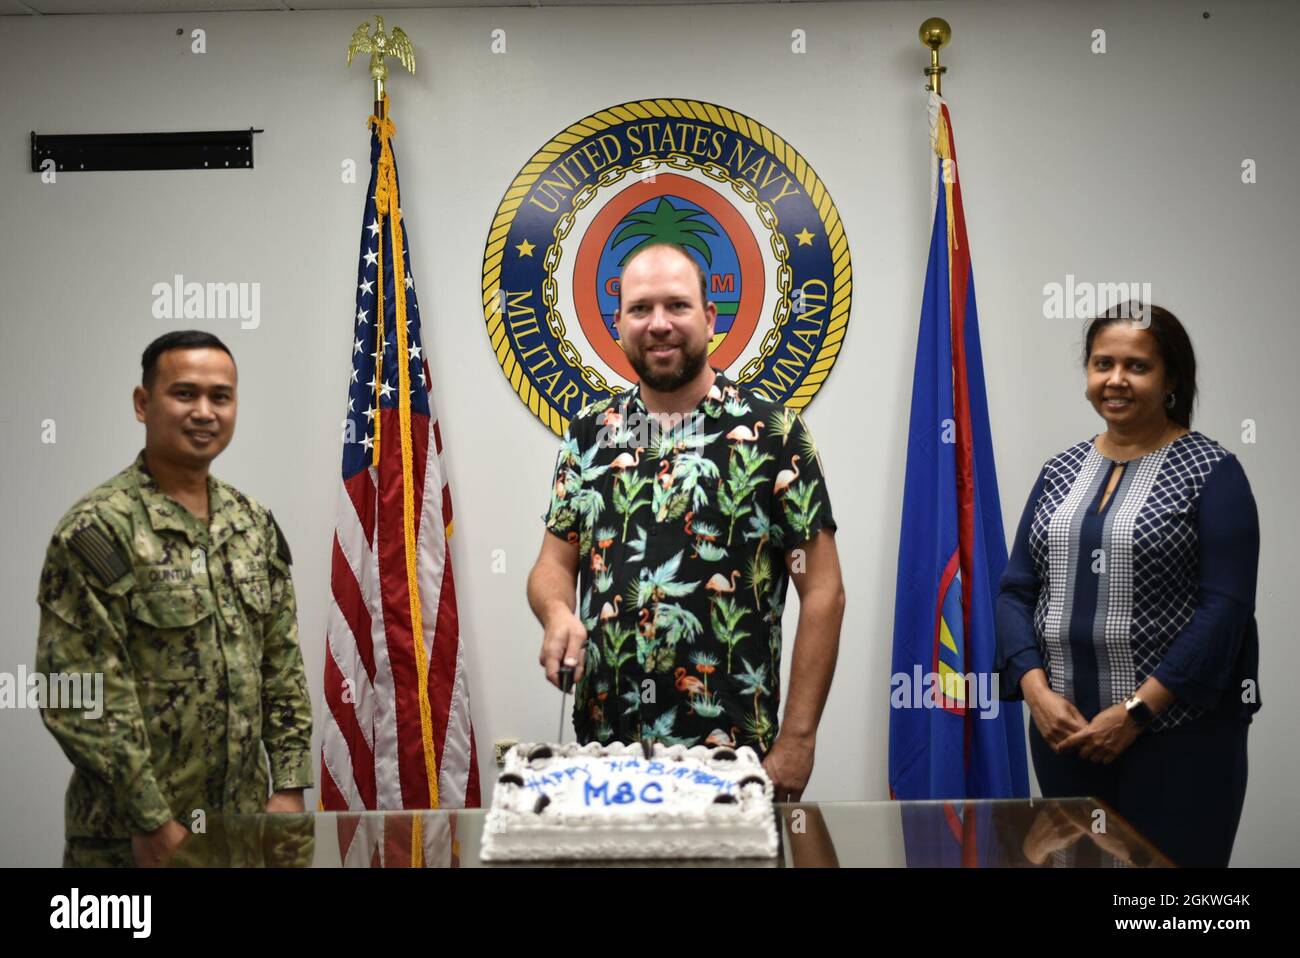 From left, Personnel from Ship Support Unit Guam, HM2 Perpetuo Quintua, Christopher Boschert, and Jaqueline Kinloch-Miller, join the command in celebrating Military Sealift Command's birthday on July 9.  SSU Guam is part of MSC Far East. “I am extremely proud of everyone assigned to Military Sealift Command Far East, whether active duty or civilian, ashore or afloat, and salute and celebrate their service,” Capt. Samuel F. de Castro, commodore, MSC FE, said. Quintua was recently selected as MSC Far East's junior Sailor of the quarter.  Boschert and Kinloch-Miller earned civilian of the quarter Stock Photo